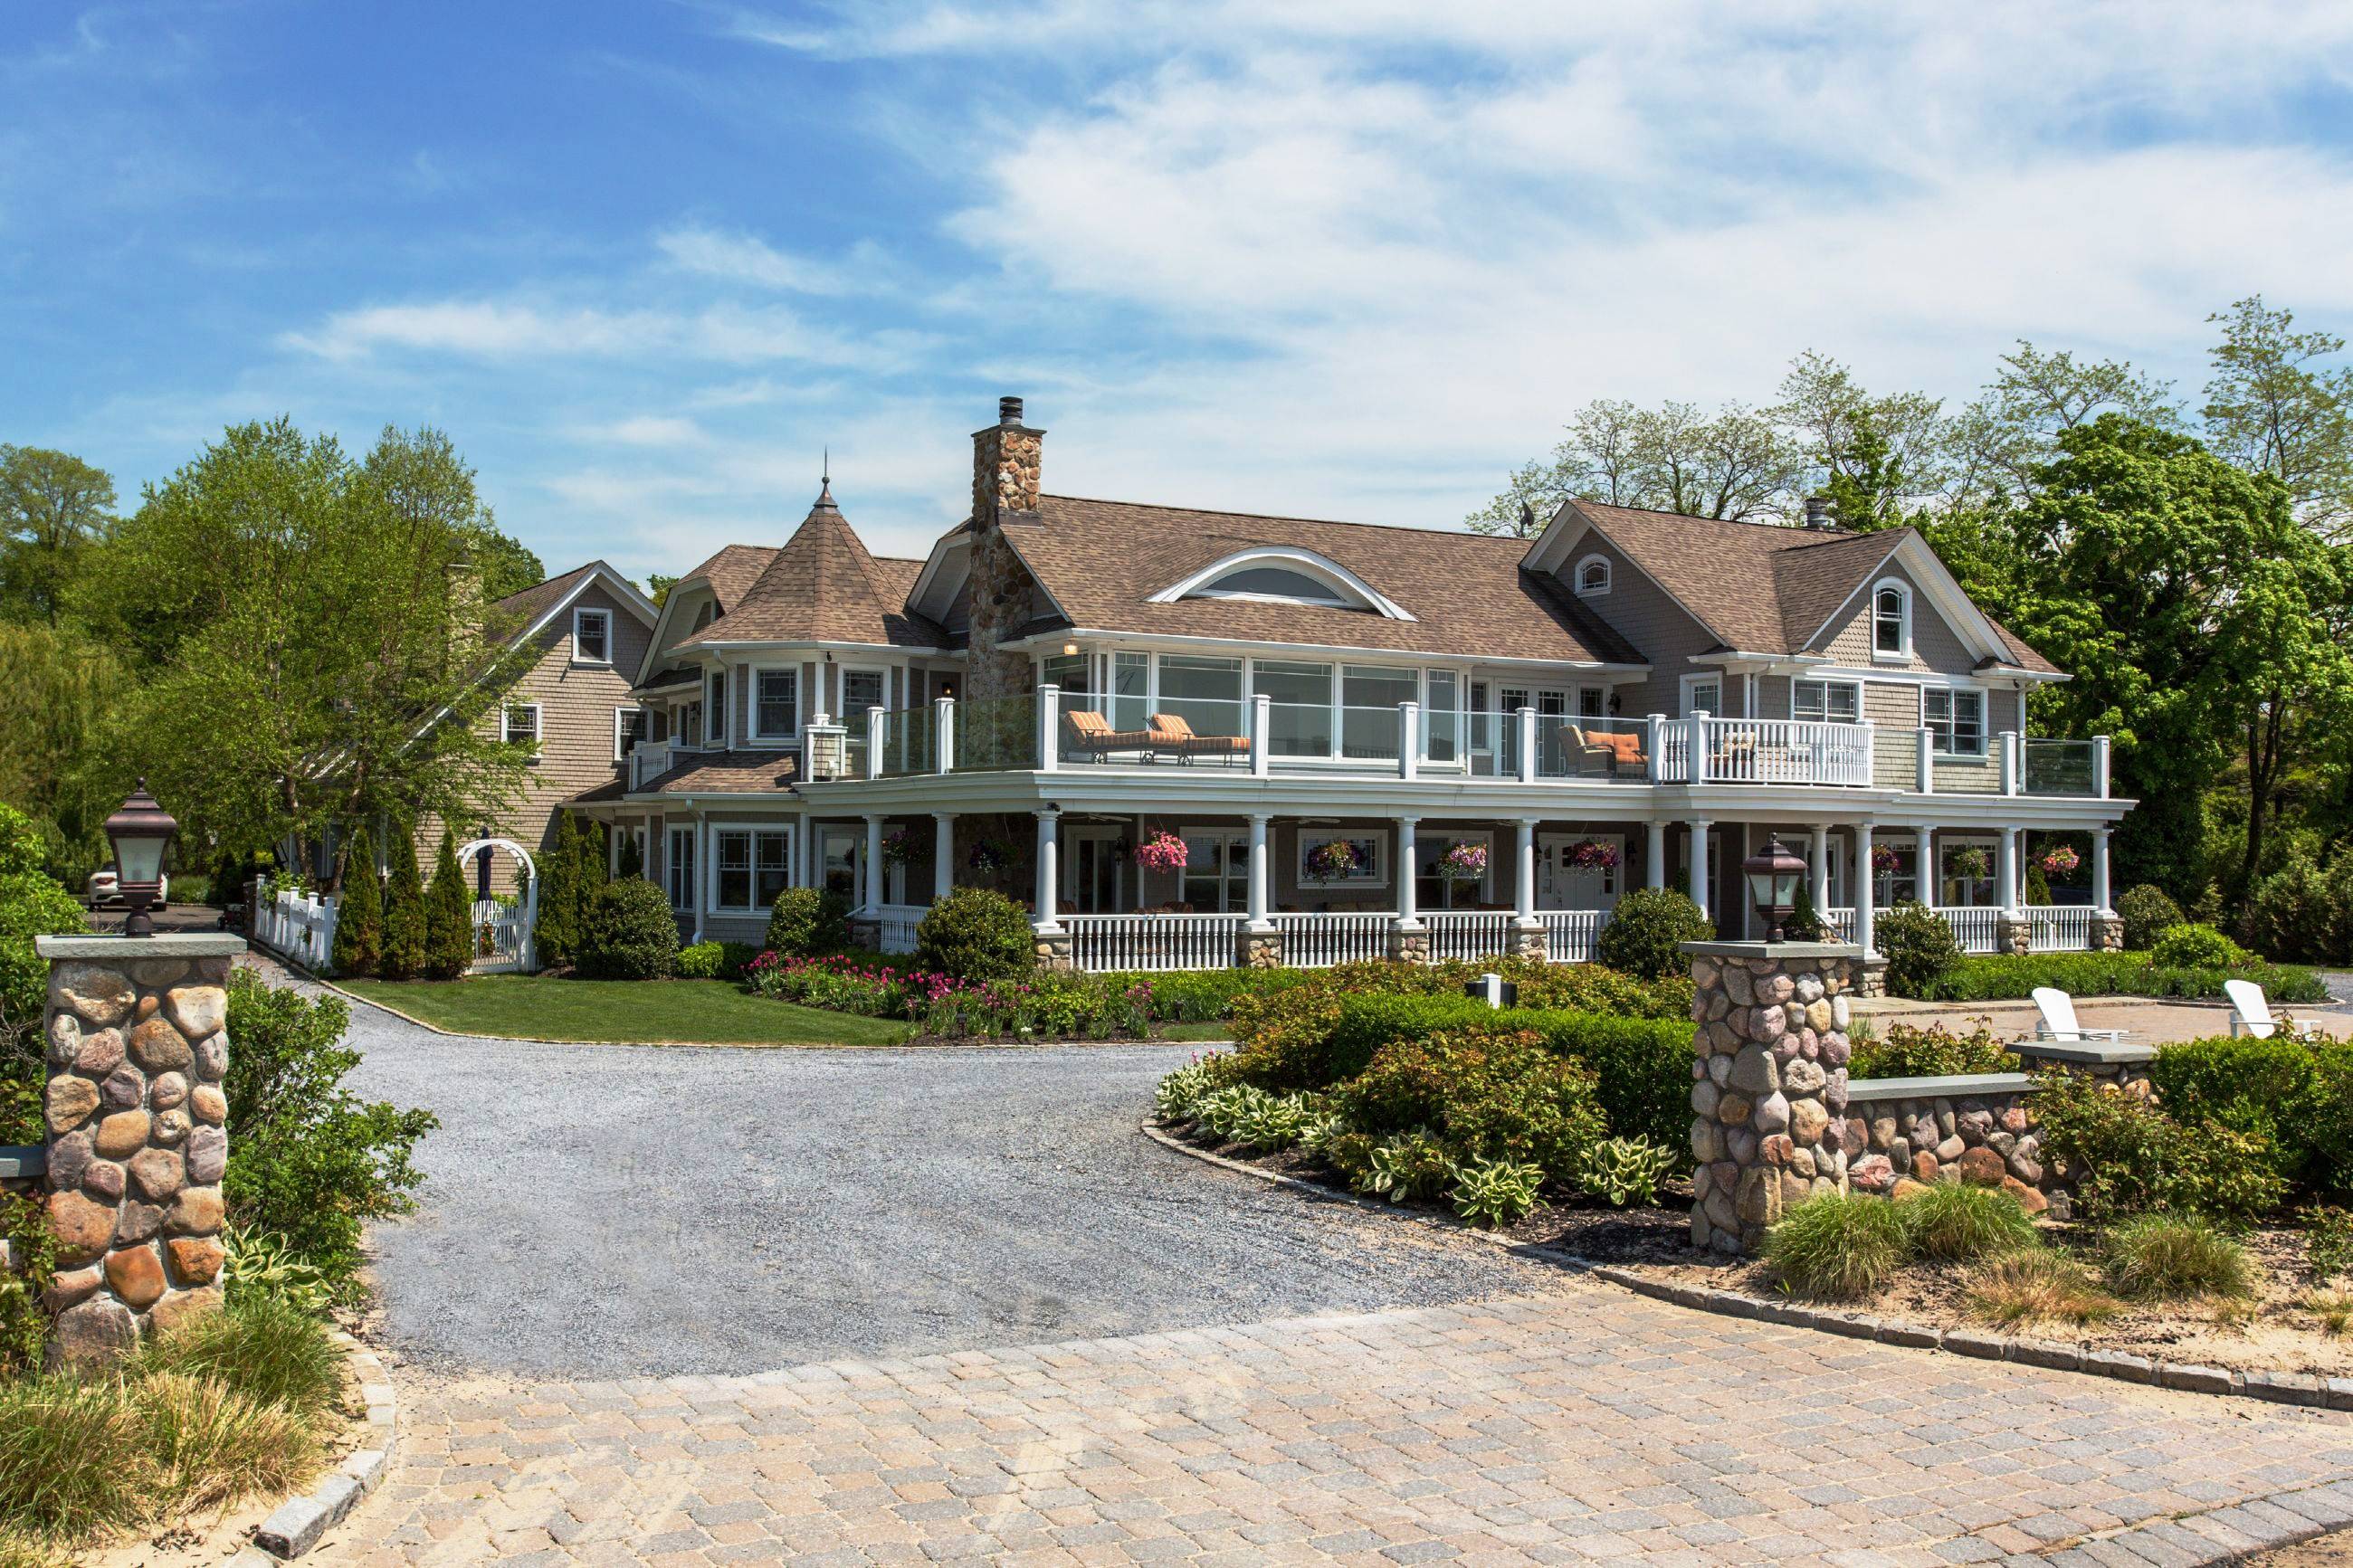 Stunning Waterfront Estate with NYC Skyline Views sits privately on 2+ acres